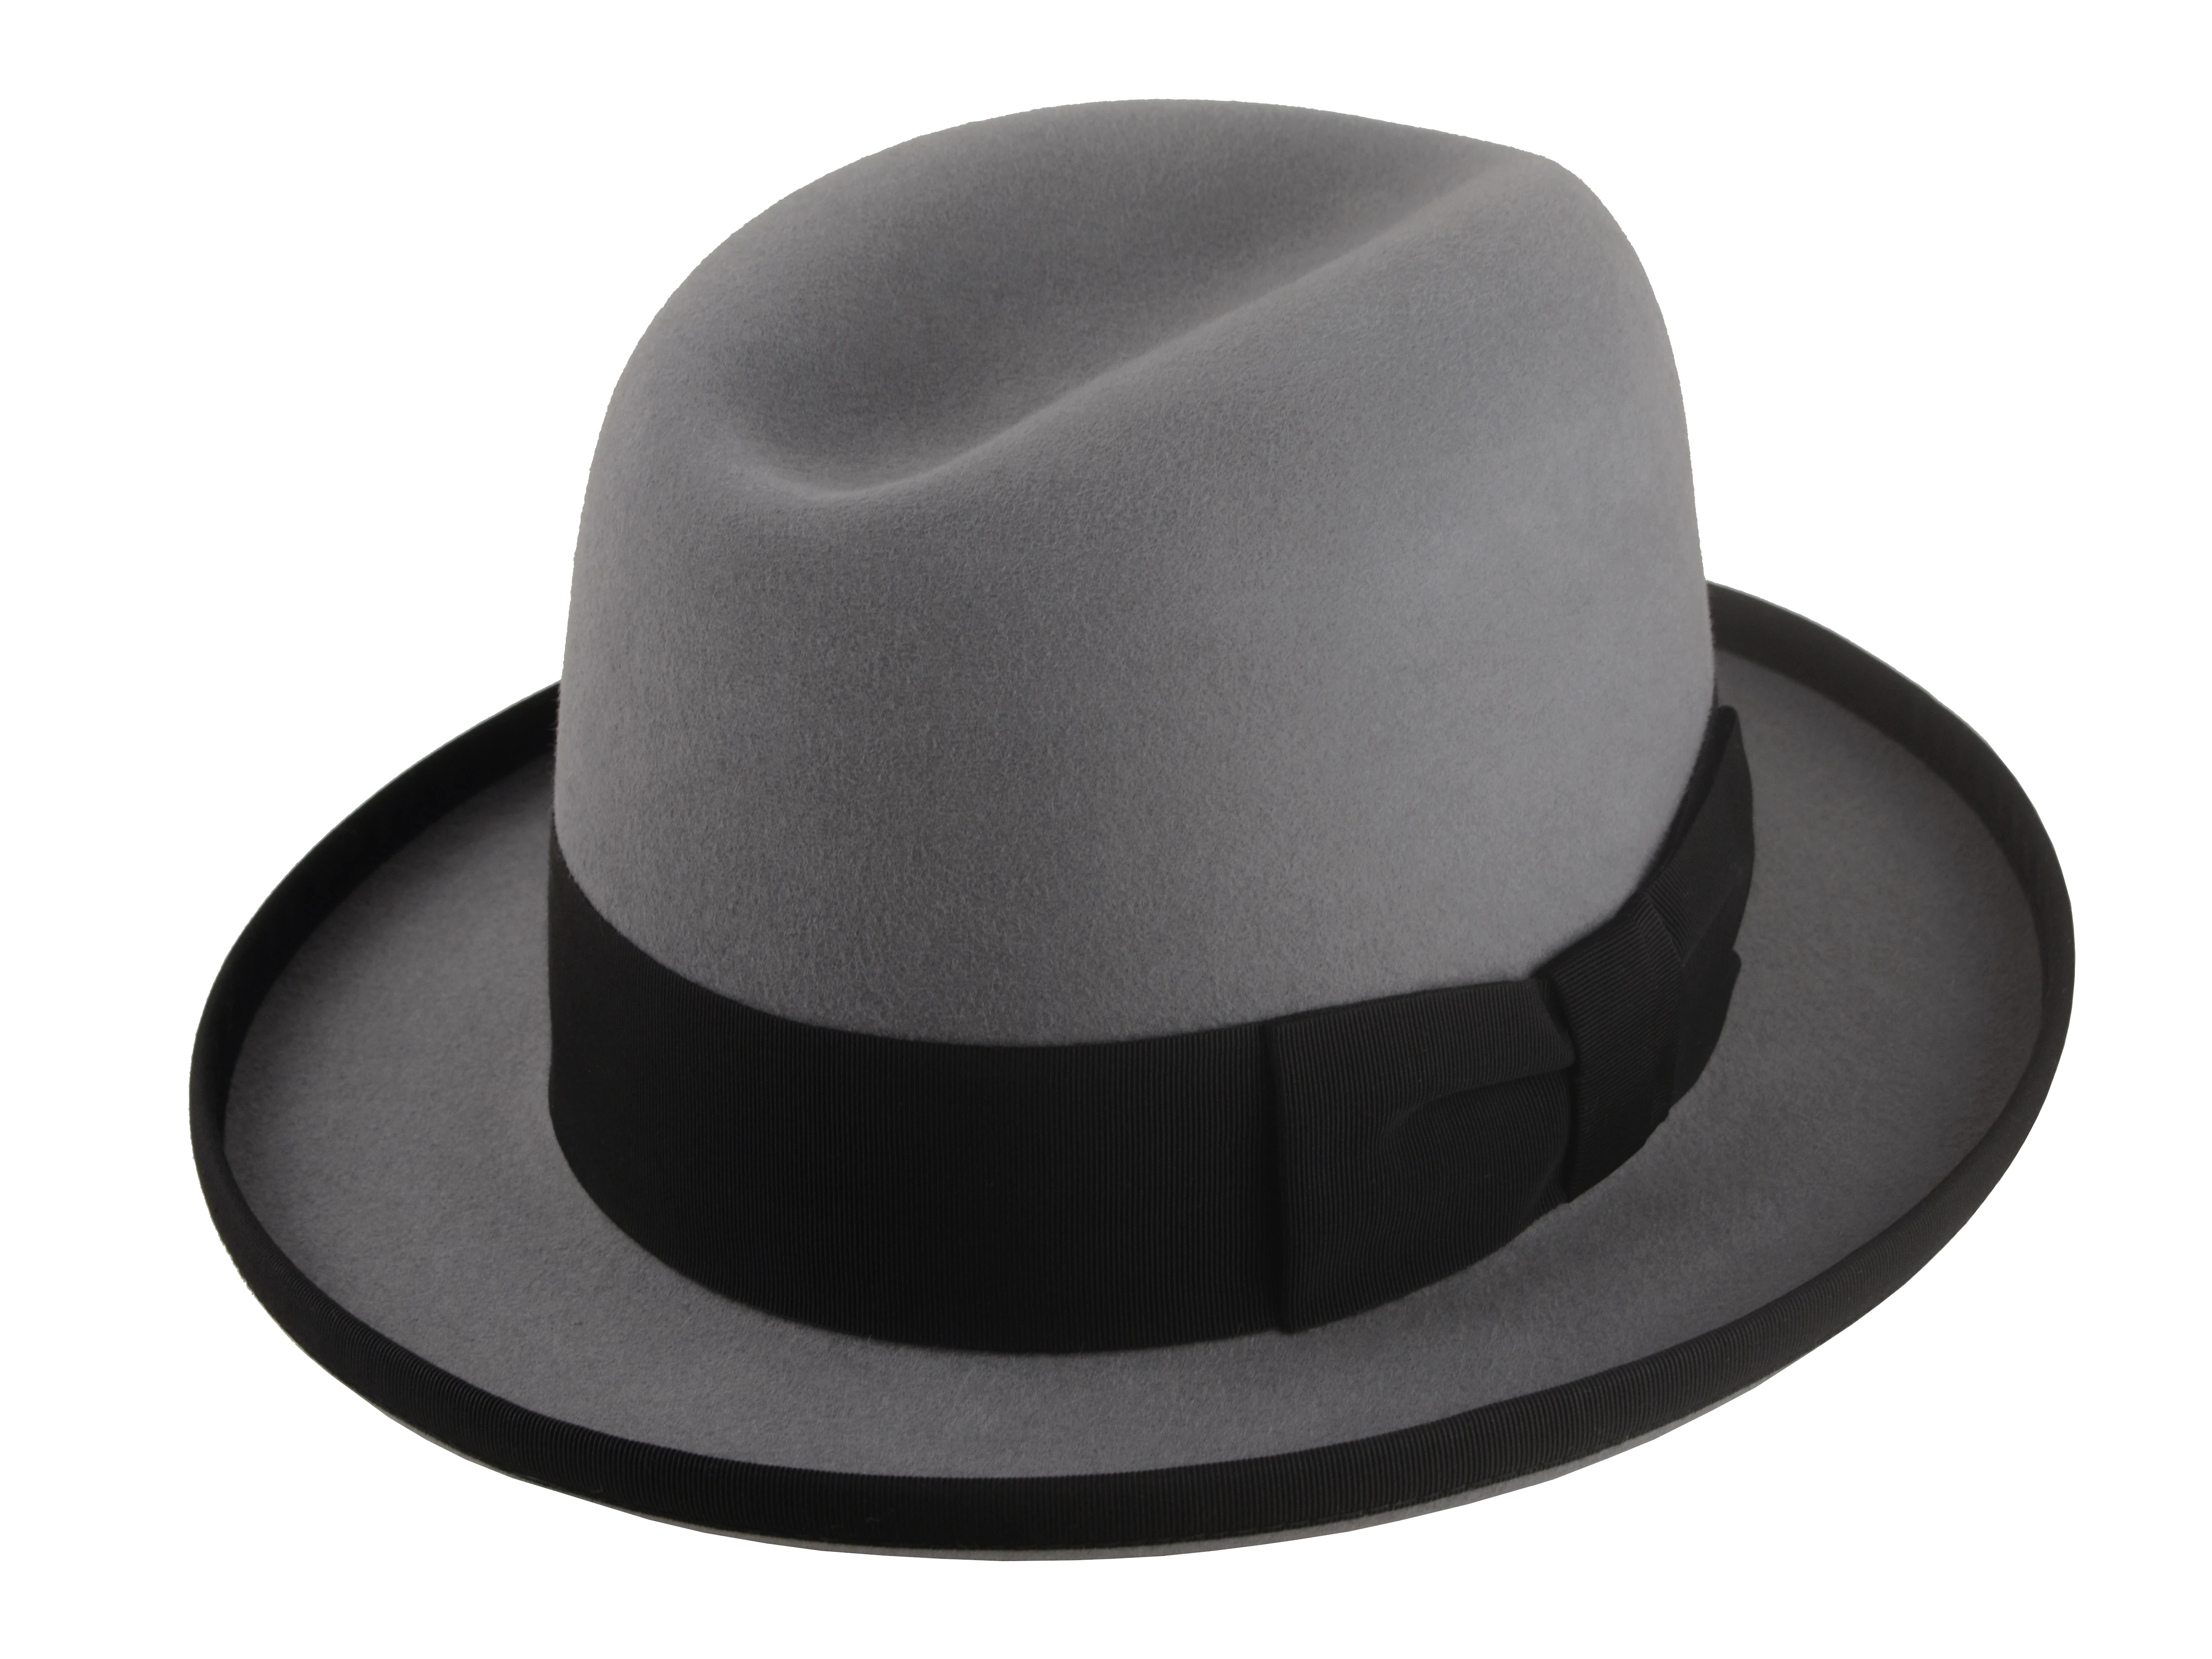 he Cerebelle: Pewter grey homburg hat with a single-crease crown design | Agnoulita Hats